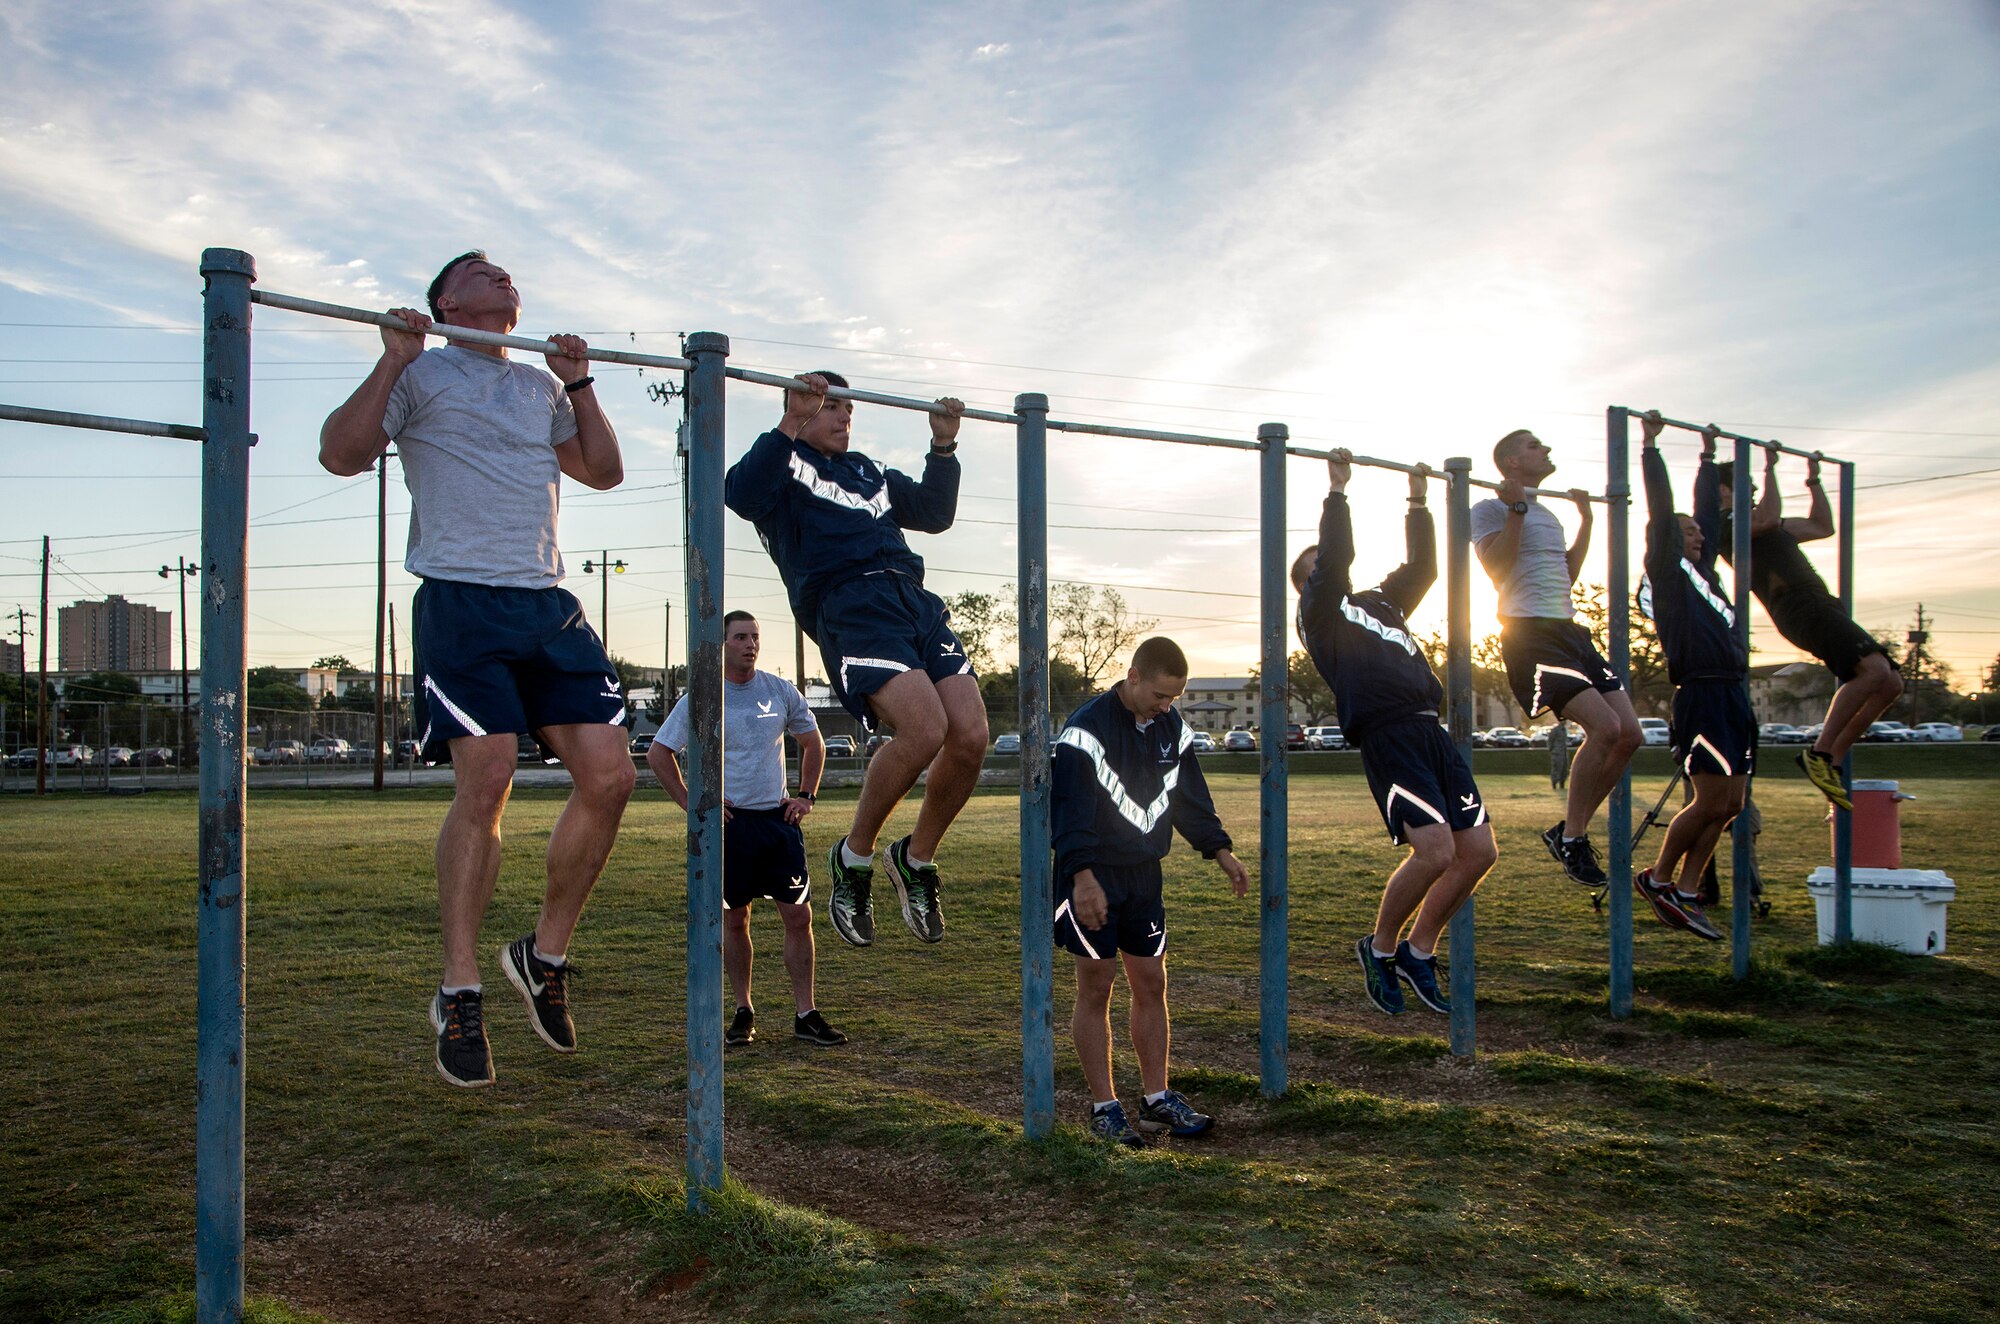 Members of the 350th Battlefield Airmen Training Squadron and from throughout Joint Base San Antonio-Lackland accomplish pull ups during a memorial remembrance ceremony honoring Lt. Col. William “Bill” Schroeder April 7, 2017, at JBSA-Lackland, Texas, Medina Annex. Schroeder’s unit honored his legacy by renaming a drop zone as Schroeder DZ and participated in a "Monster Mash" fitness competition, remembrance ceremony and log march. On April 8th, 2016 Schroeder recognized a perilous situation developing and reacted swiftly by putting himself between an armed individual and his first sergeant. In the process, he saved lives of other squadron members while being fatally wounded. Schroeder was posthumously awarded the Airman’s Medal, given to those that distinguish themselves by a heroic act – usually at the volunteer risk of their lives but not involving combat.  (U.S. Air Force photo by Johnny Saldivar)